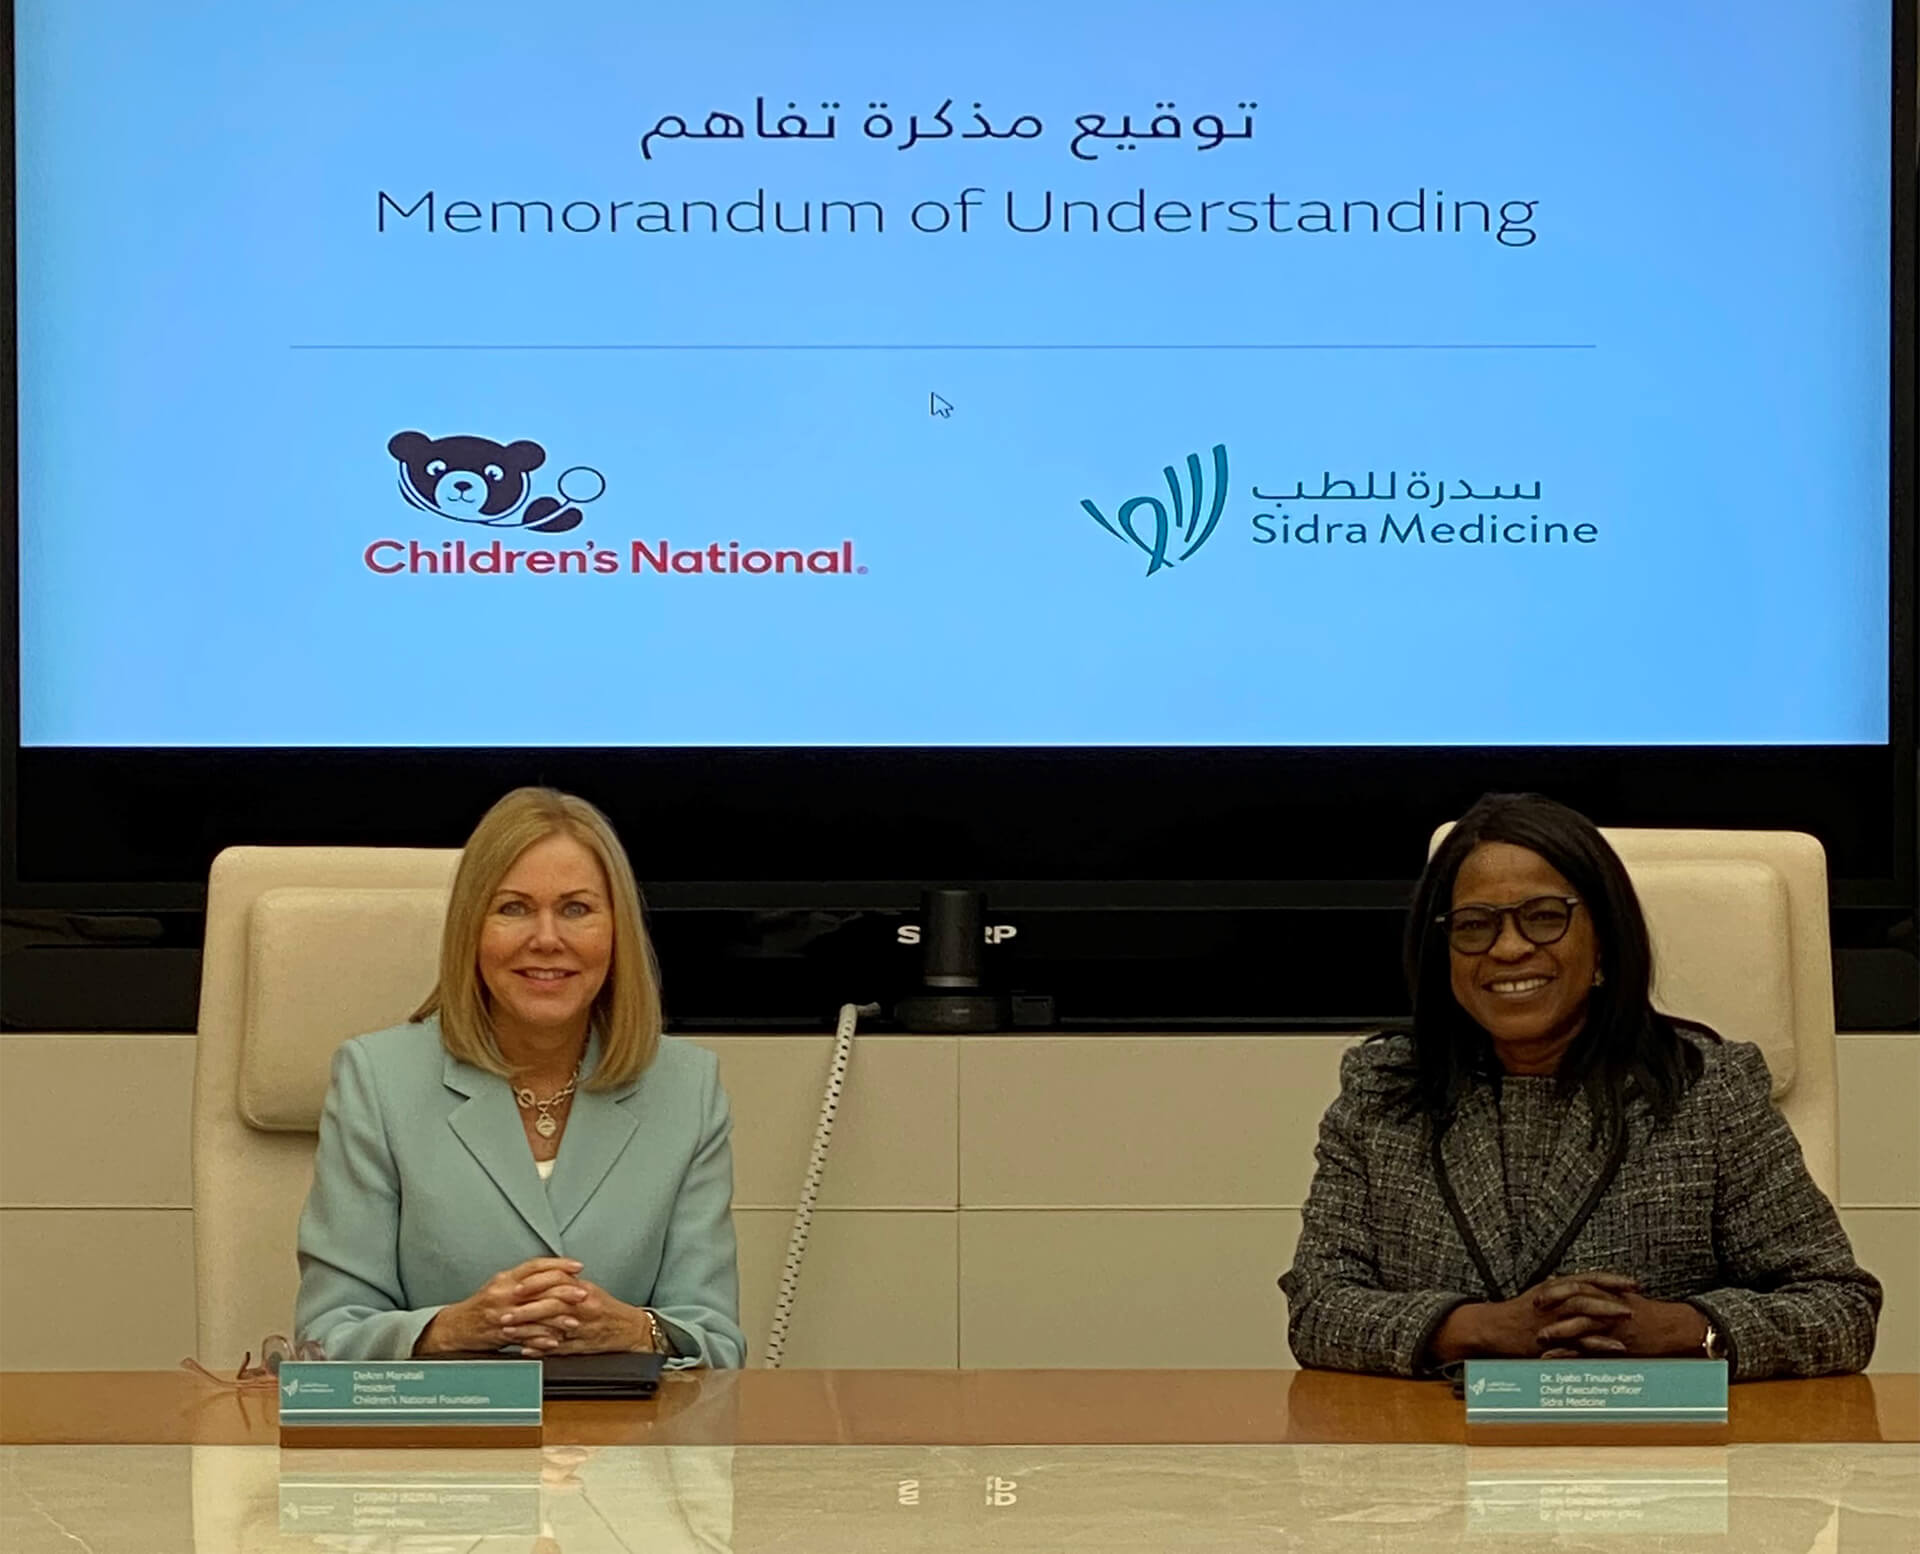 Dr. Iyabo Tinubu-Karch, Chief Executive Officer at Sidra Medicine and Ms. DeAnn Marshall, President of Children’s National Hospital Foundation 